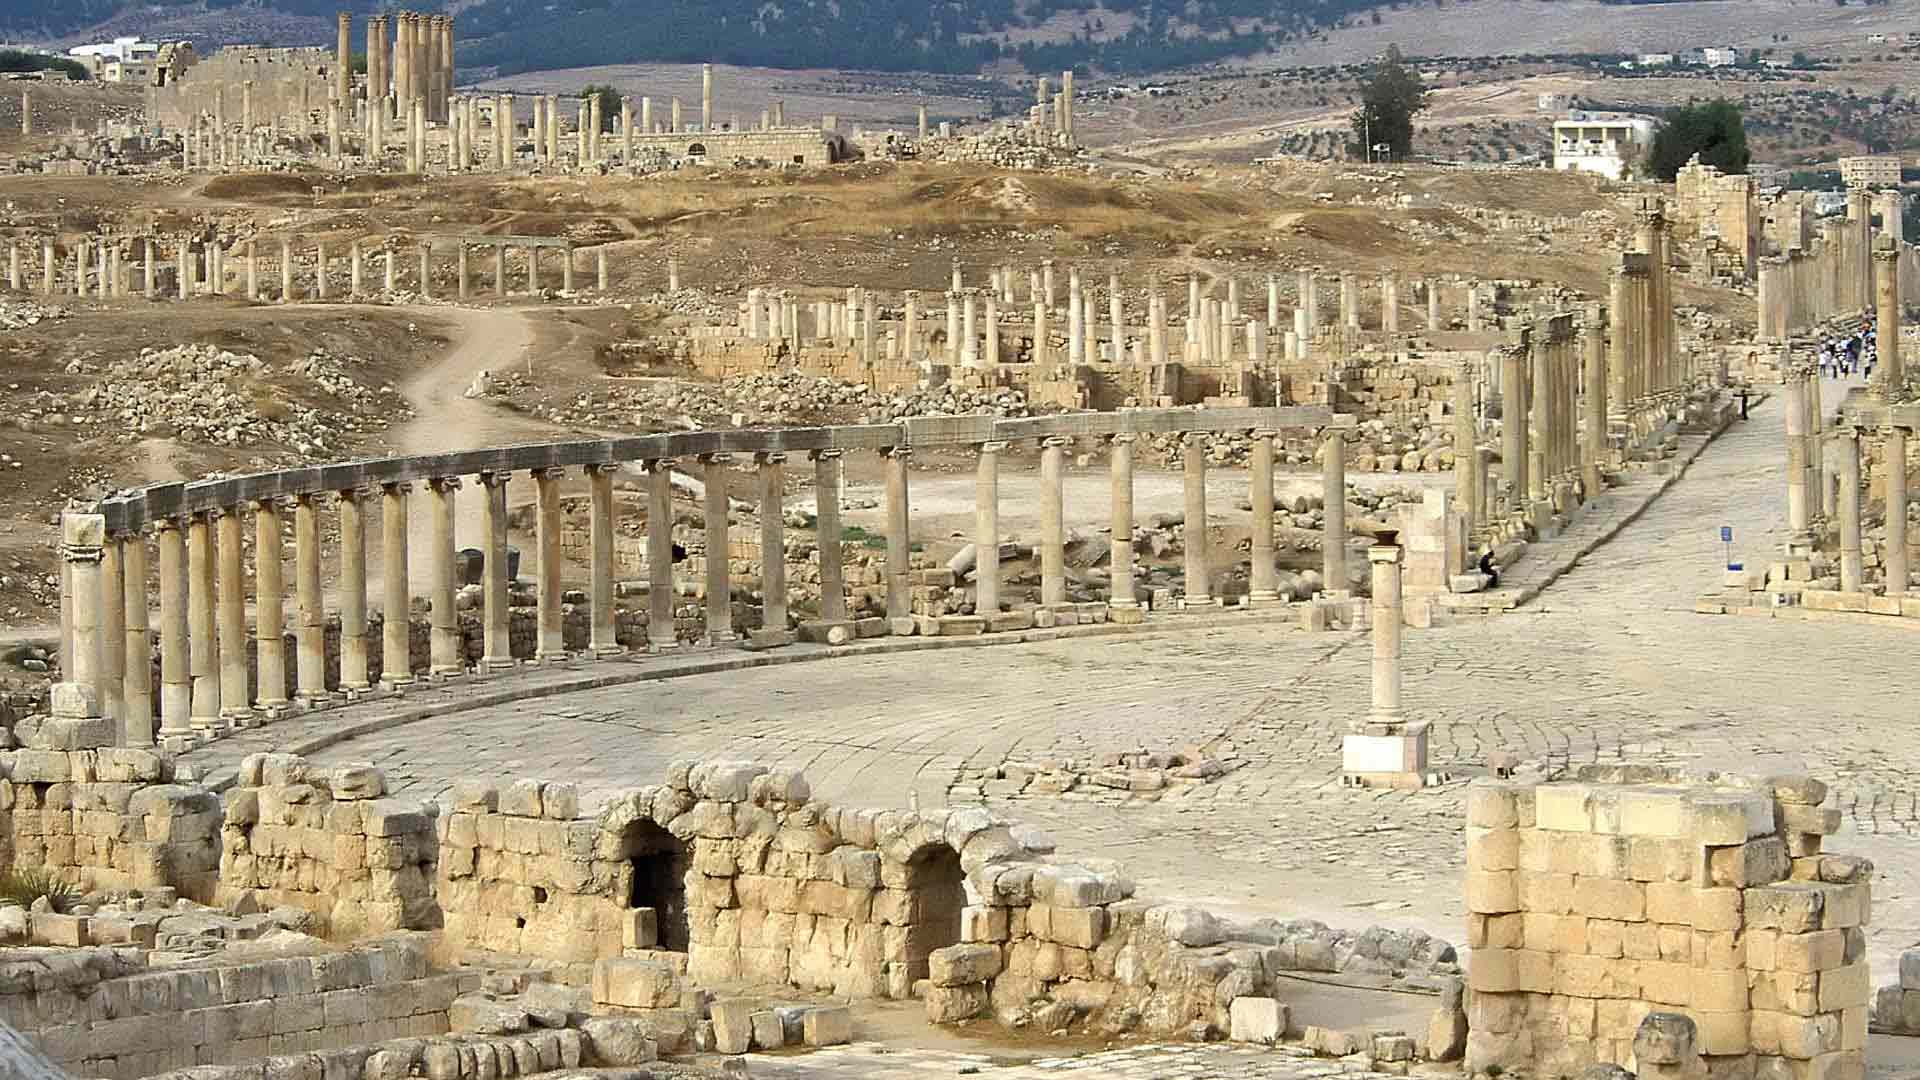 Jordan’s Jerash is said to be the best preserved Roman site outside of Italy